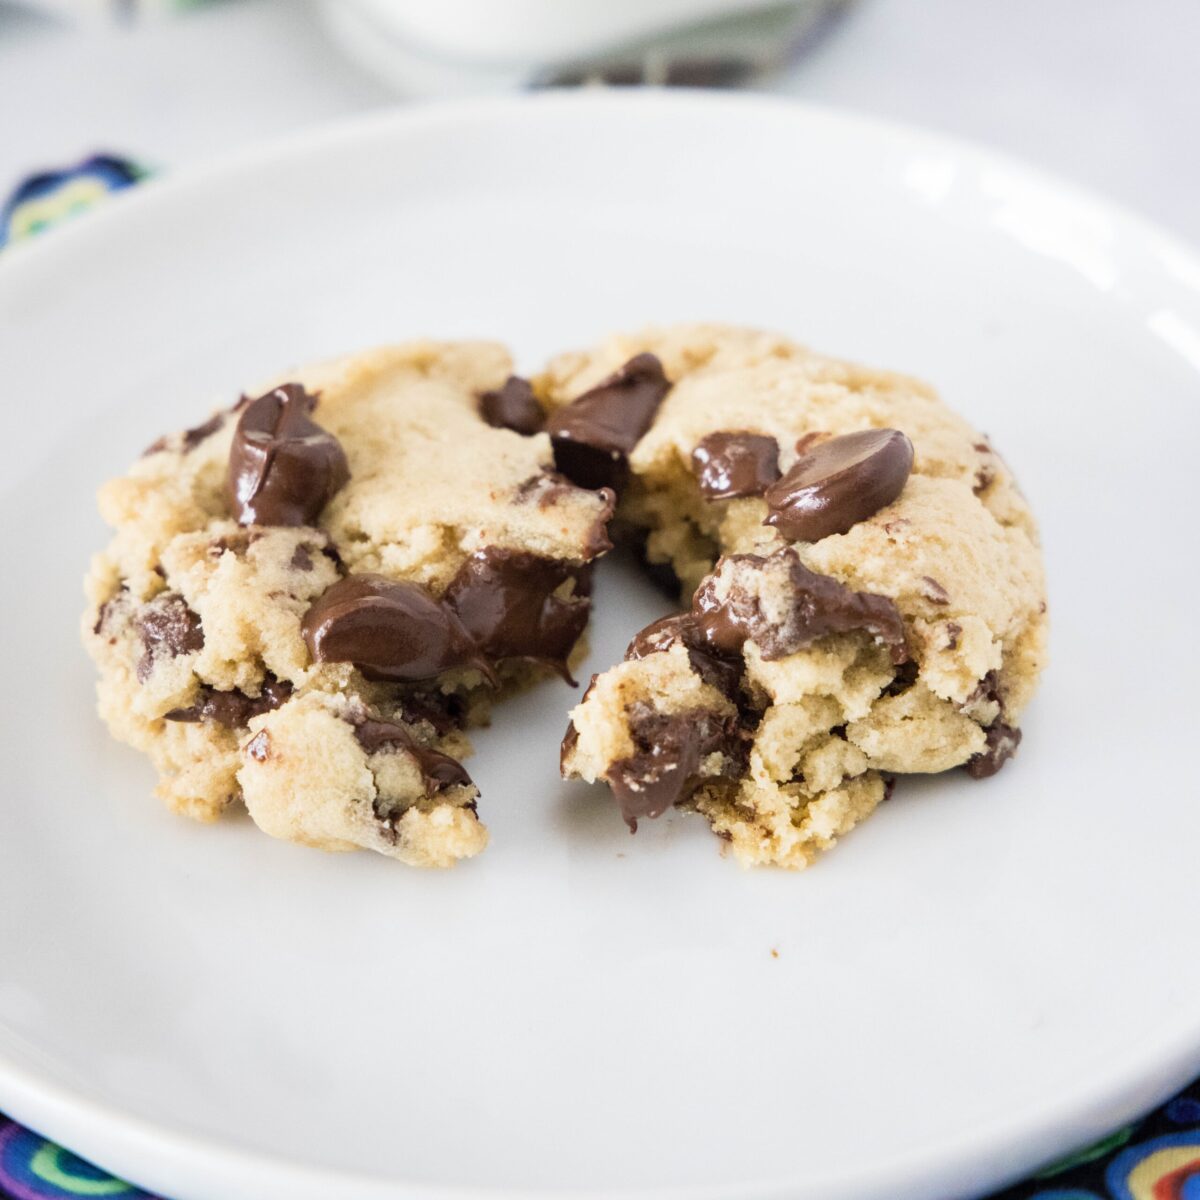 A chocolate chip cookie on a plate, split down the middle